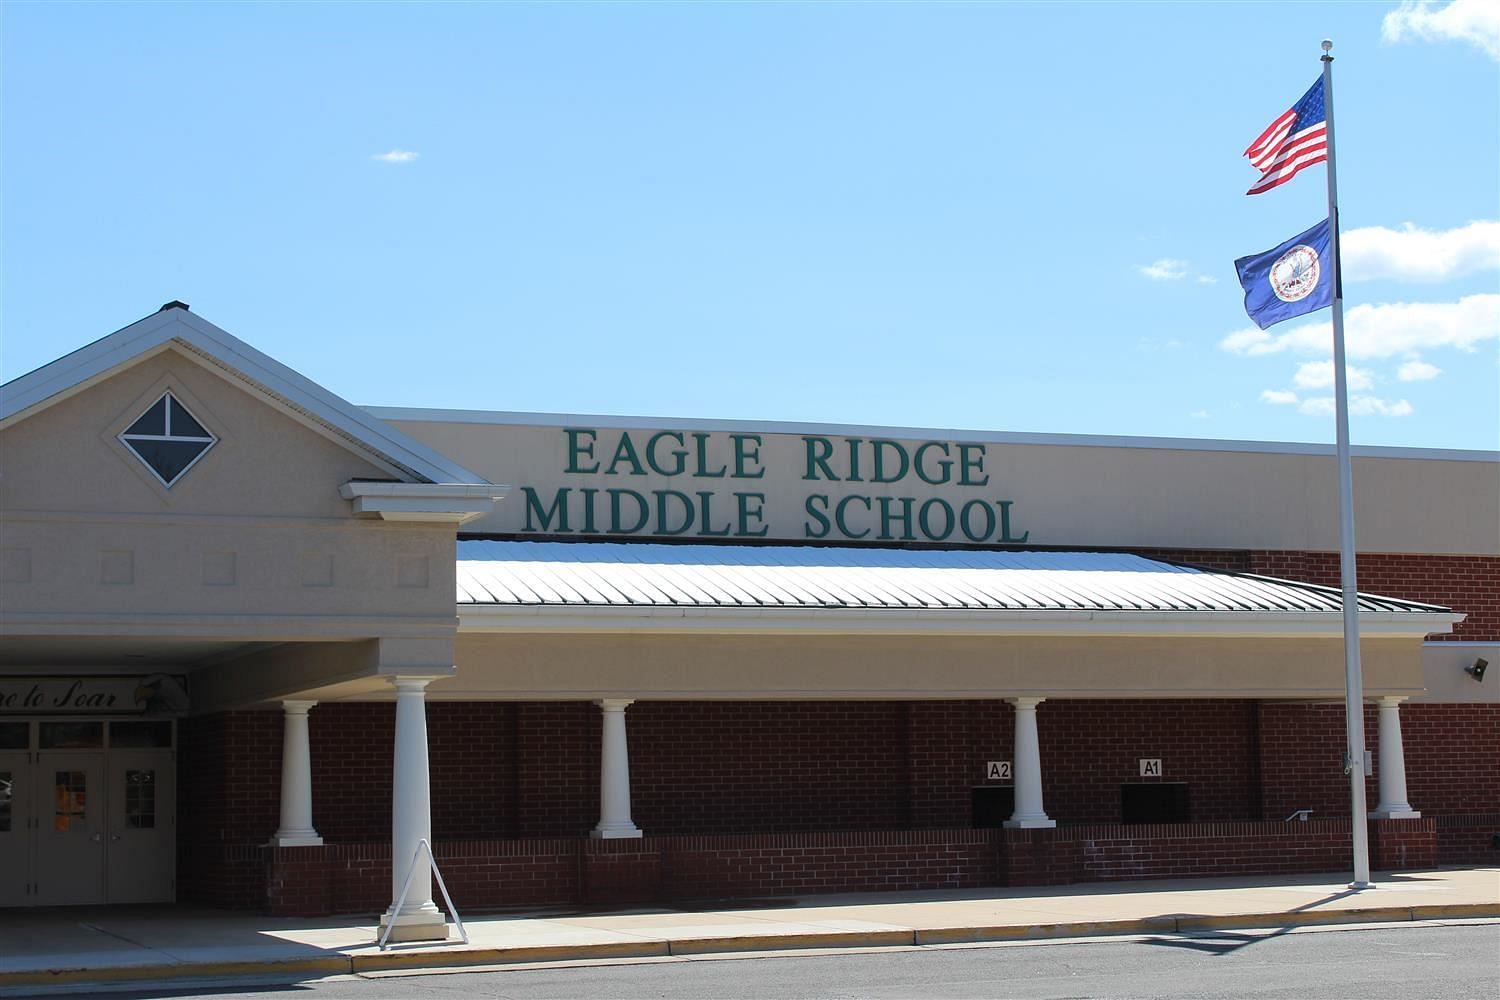 Details explored as brawl video from Eagle Ridge Middle School goes viral. (Image via Eagle Ridge Middle School)